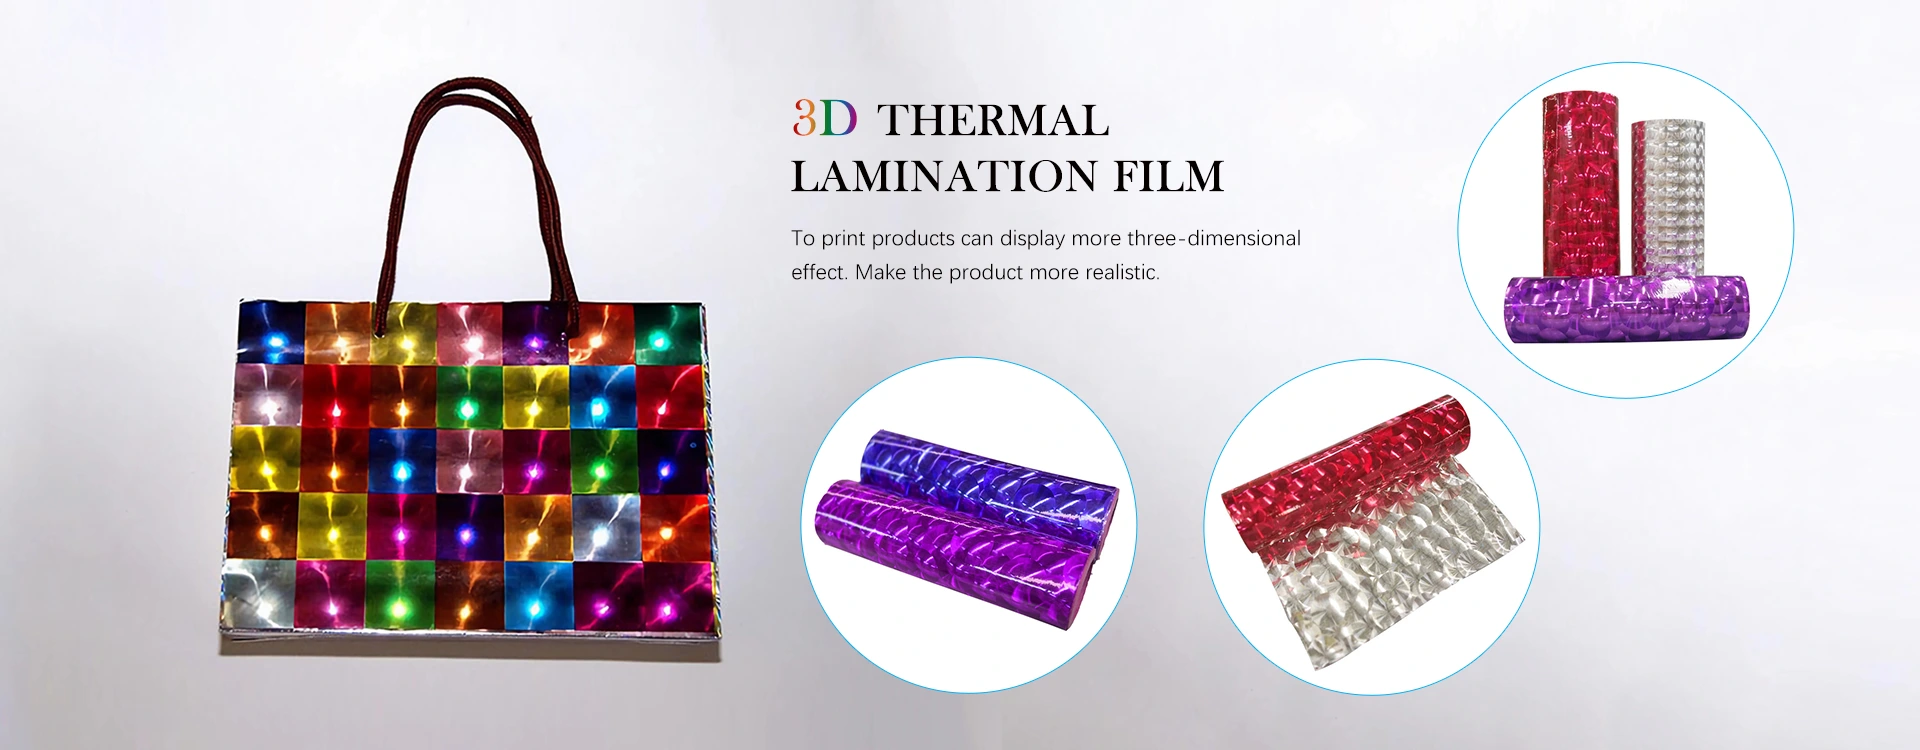 3D Thermal Lamination Film Manufactures